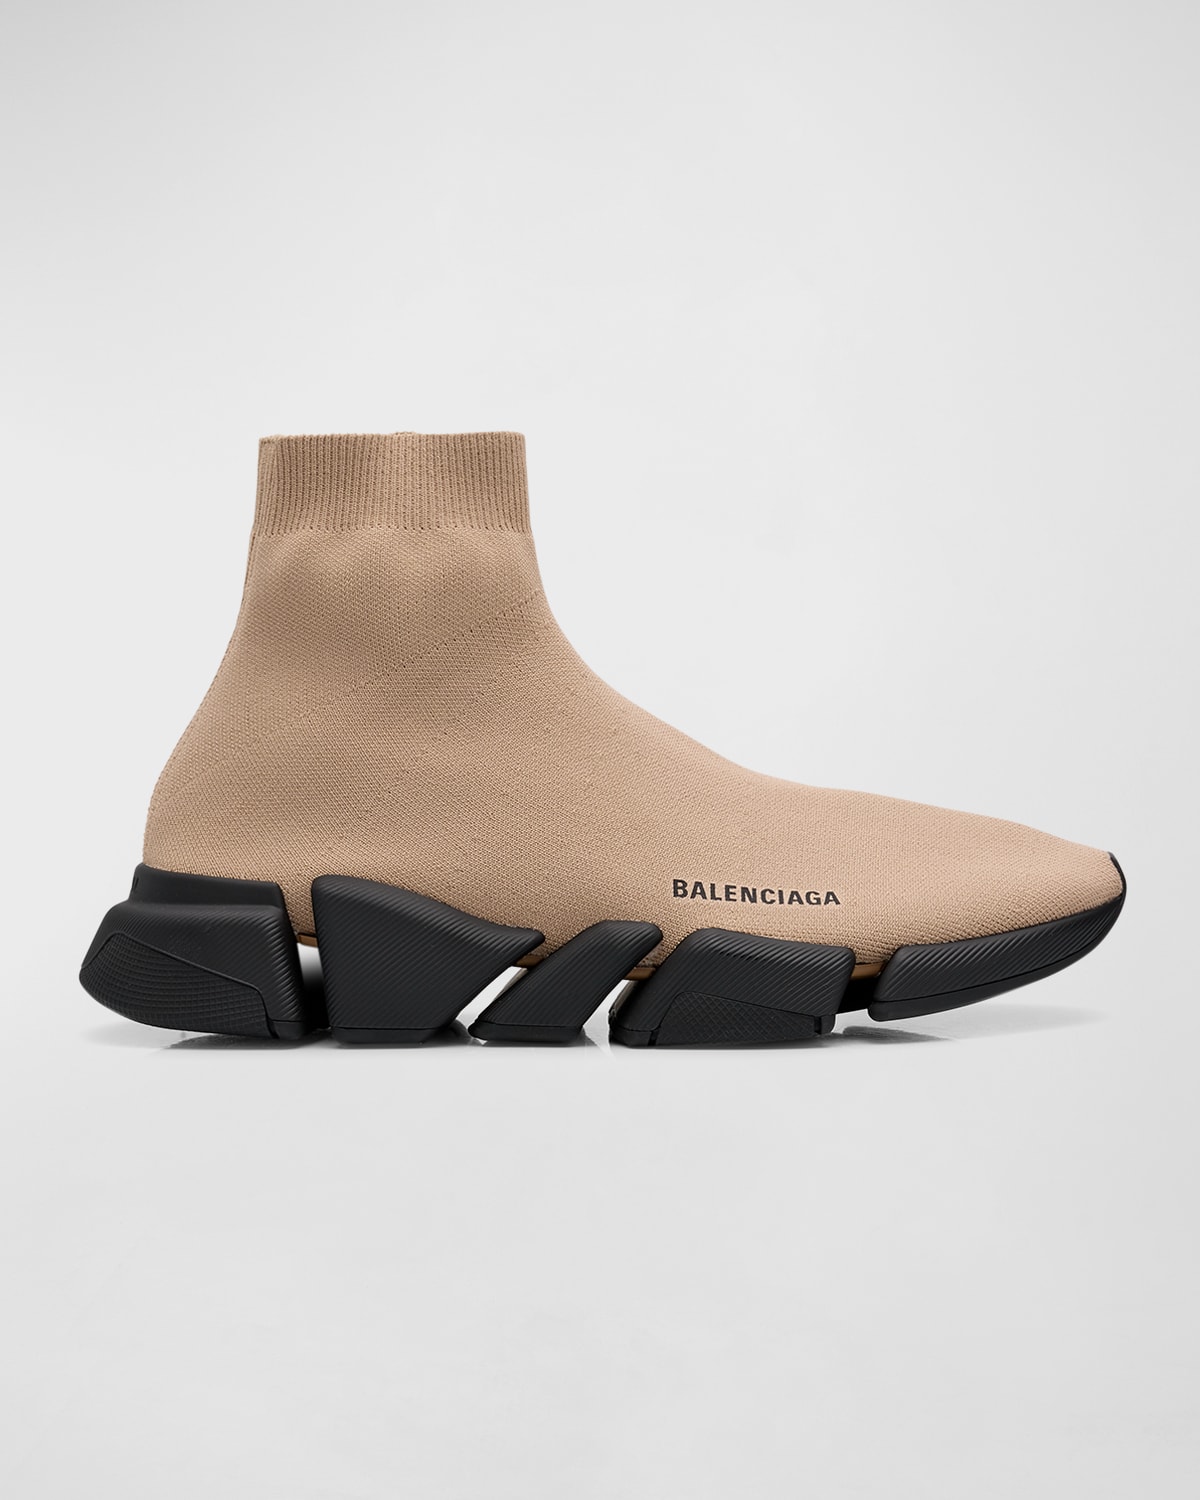 Balenciaga Men's Speed 2.0 Monocolor Recycled Knit Sneakers In Beige Black